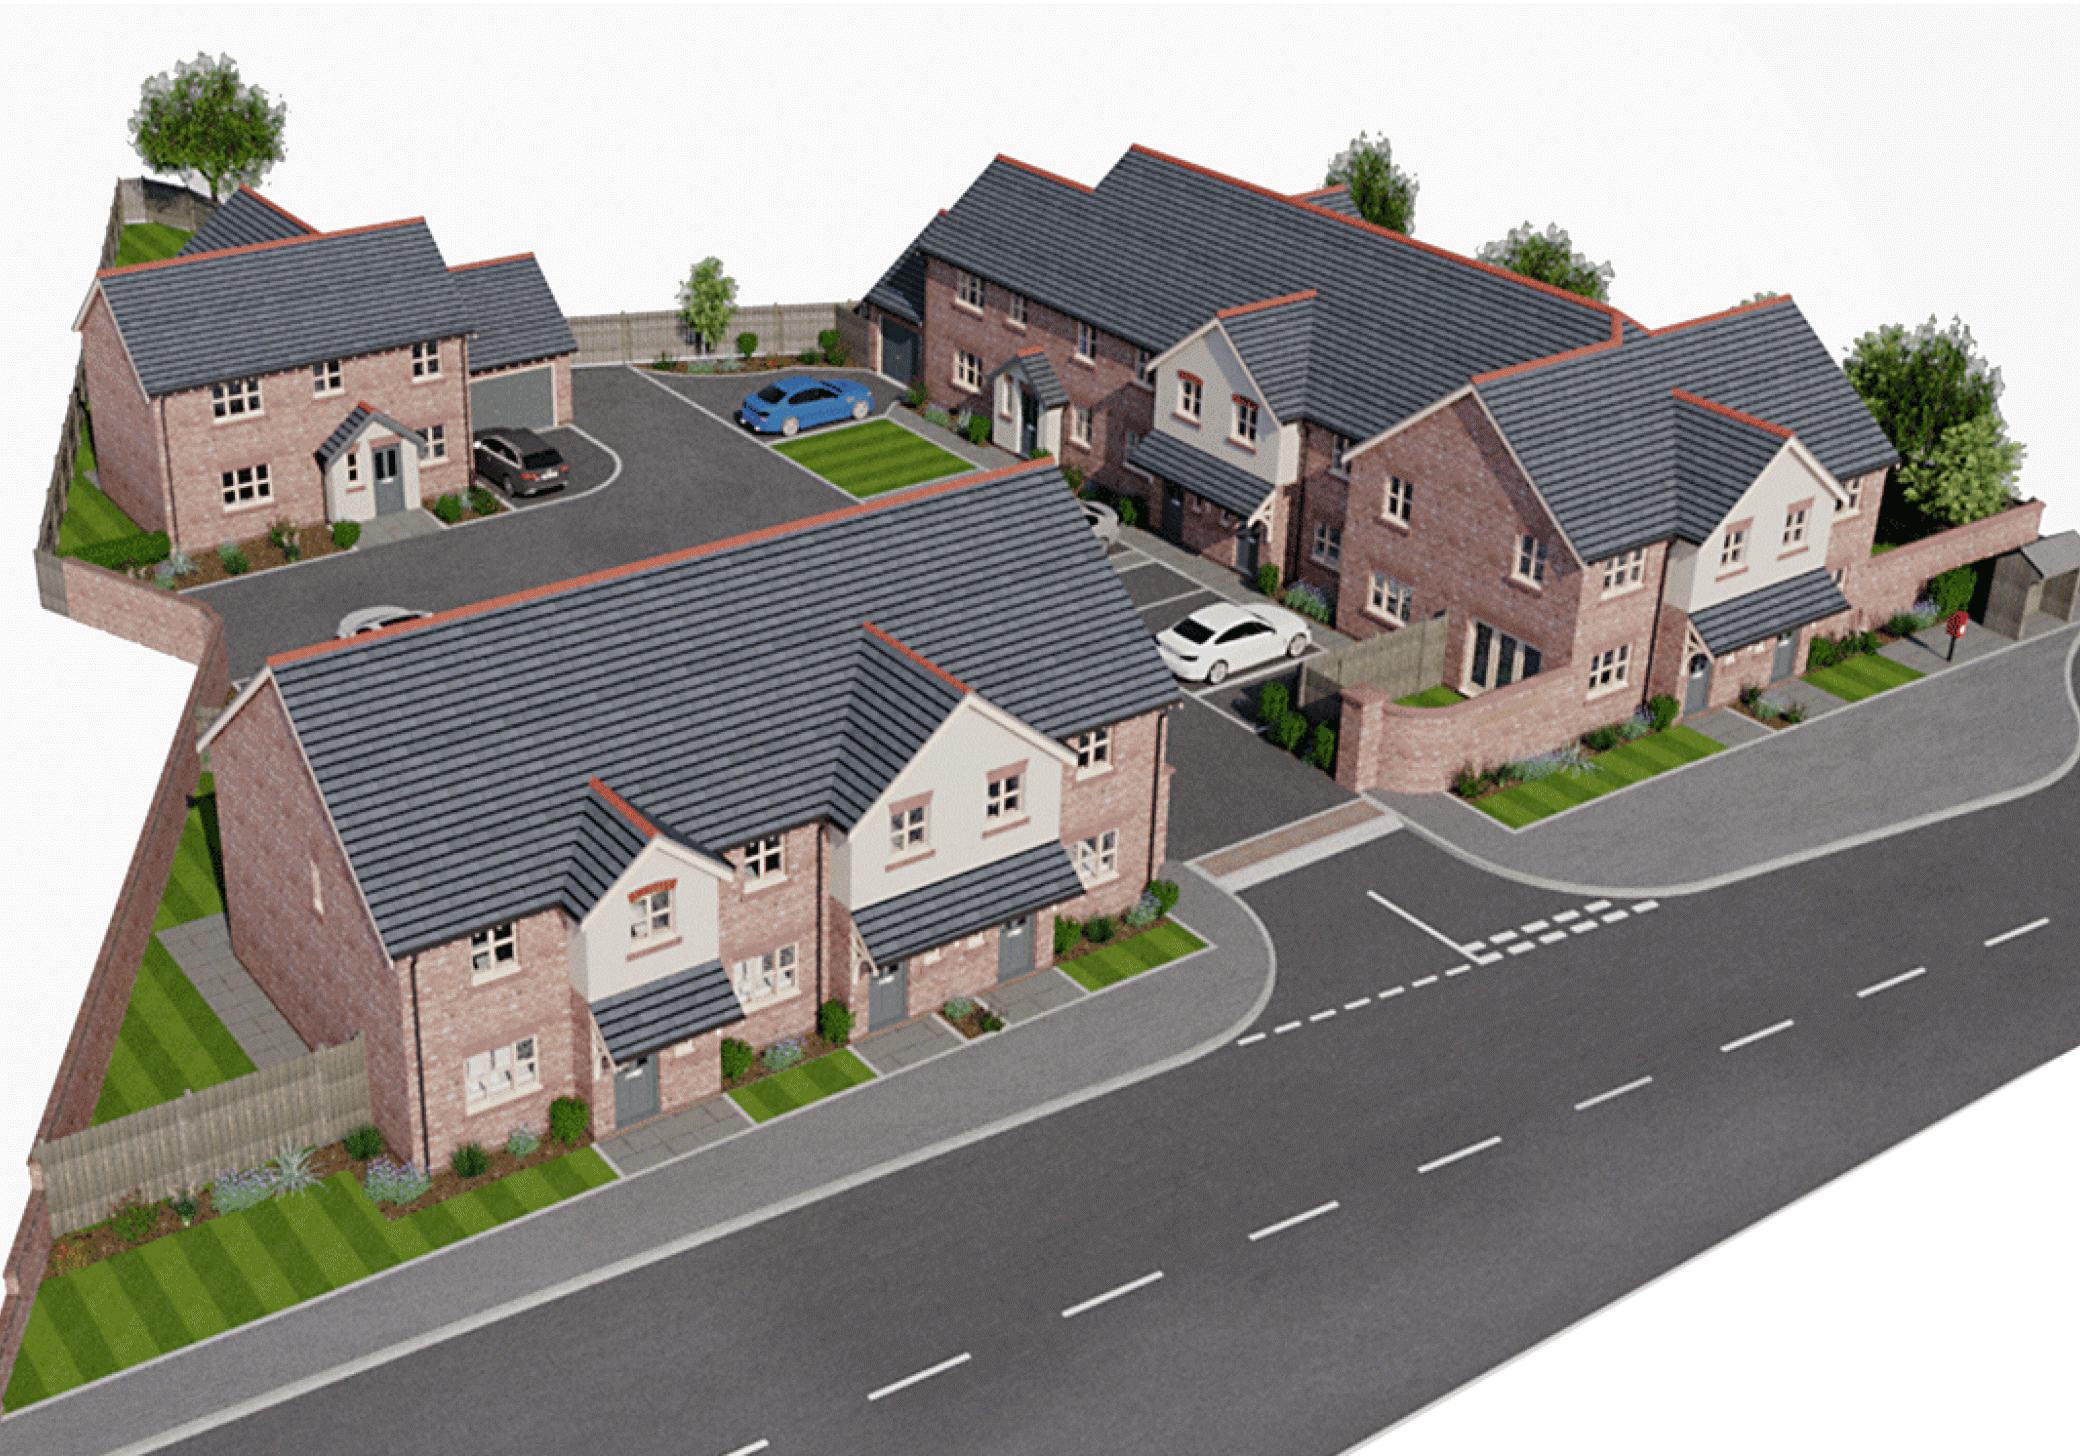 New Houses at Davenport Place, Calverley, Cheshire